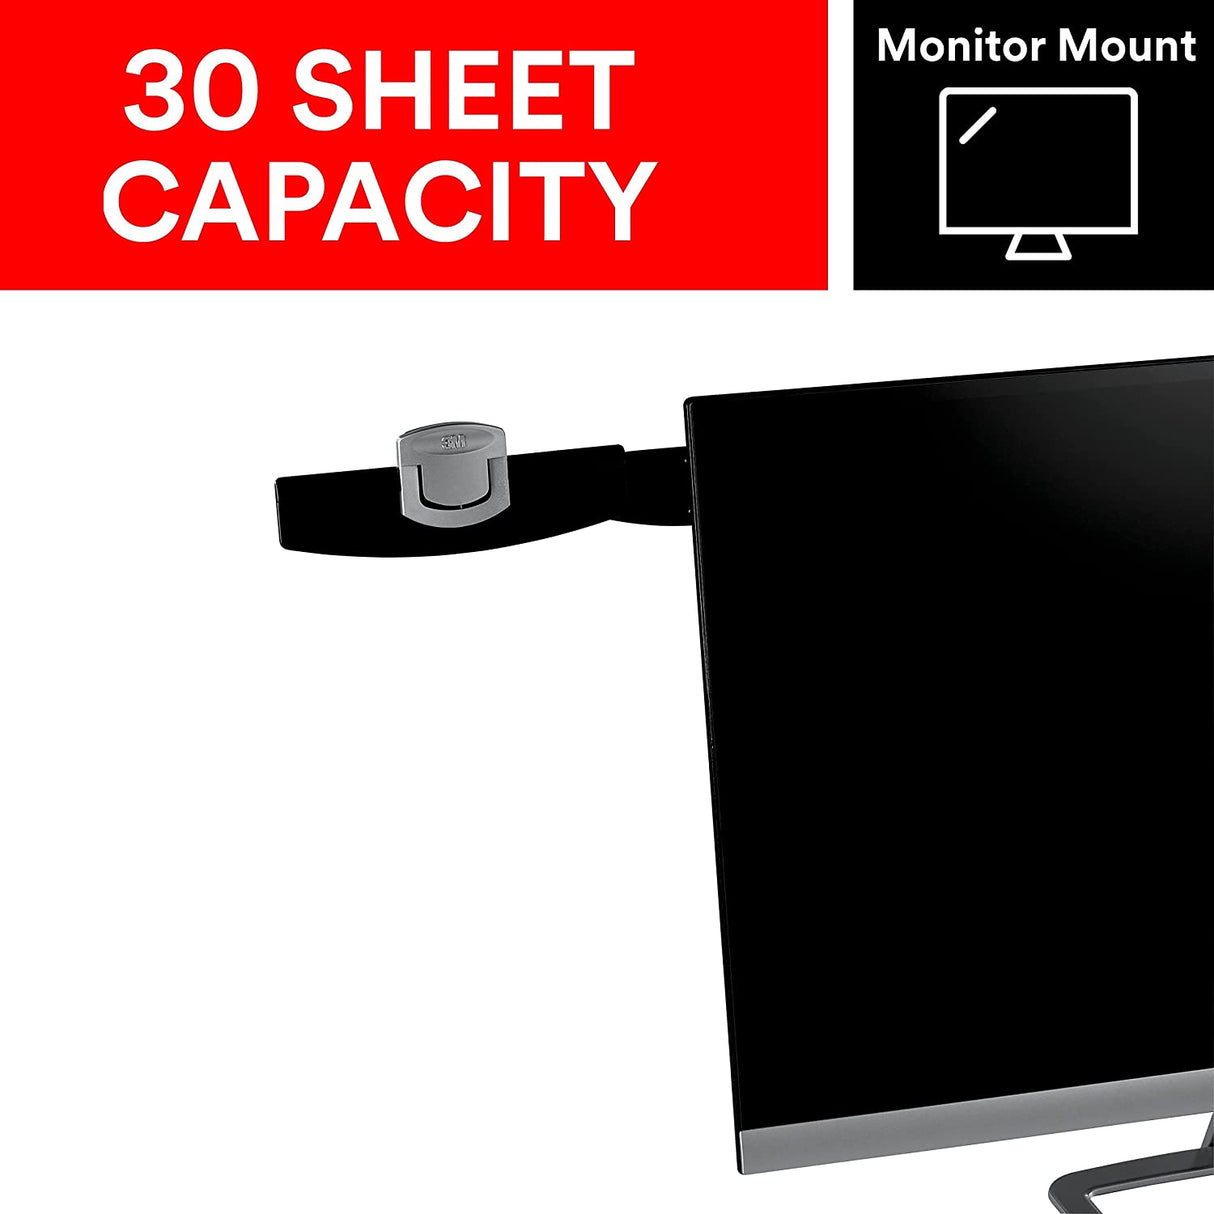 3M Monitor Mount Document Clip Copy Clip, Mounts Right or Left with Command™ Adhesive, Use on Monitors and Laptops for Easy Viewing and Reduced Clutter, Holds up to 30 Sheets, Black (DH240MB) - Dealtargets.com